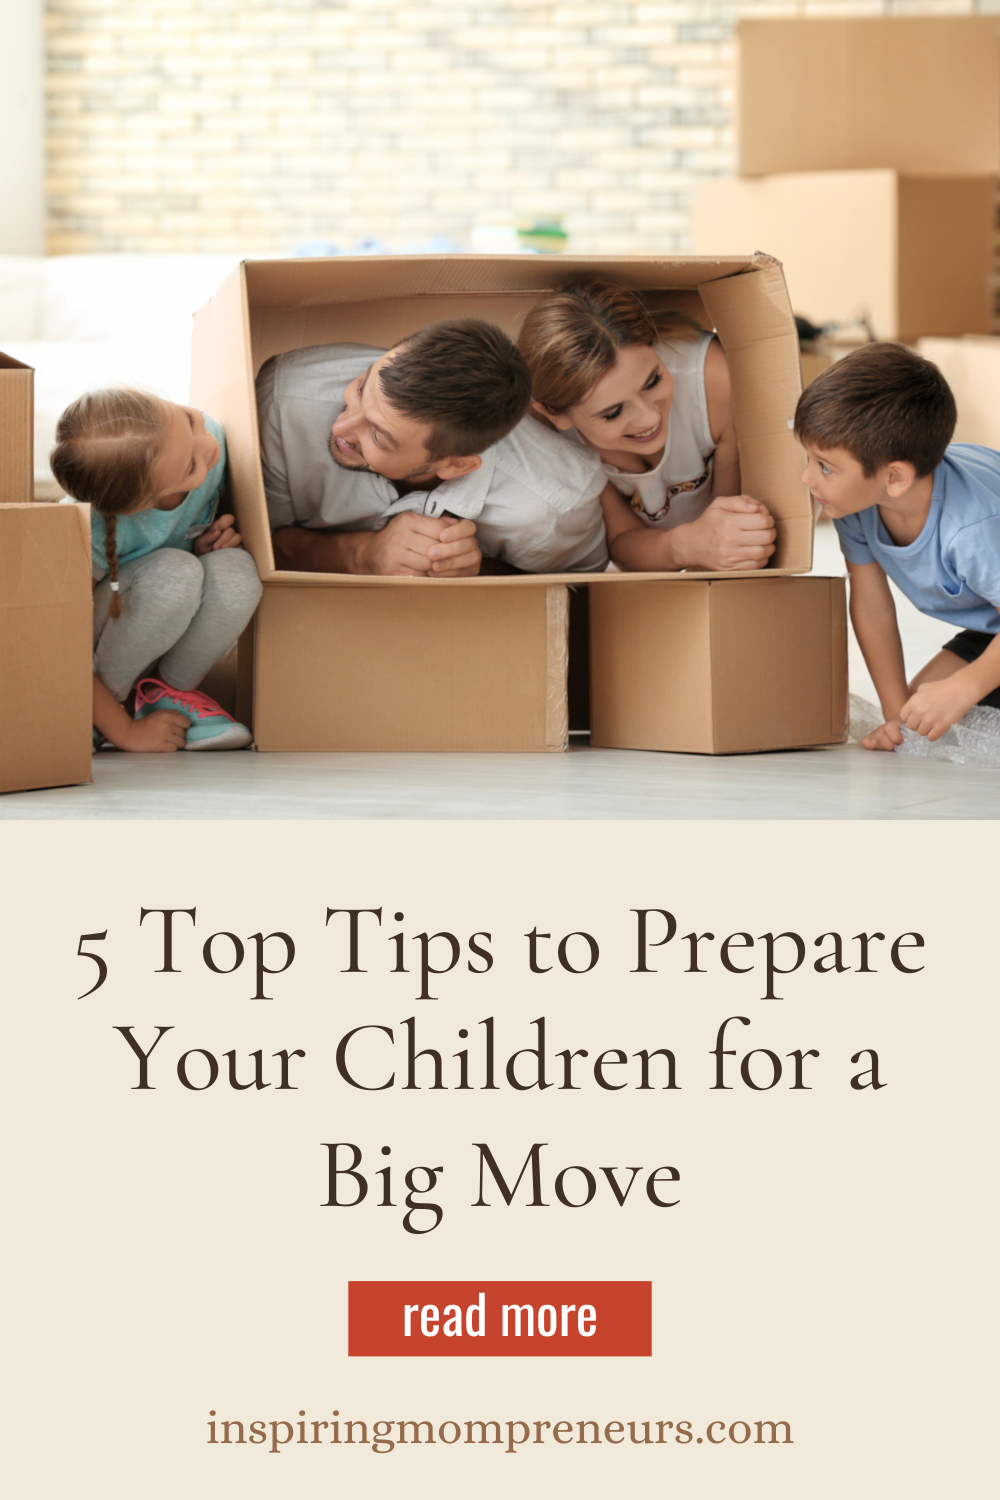 Planning to relocate your home and business? First, explore these top ways to prepare your children for a big move and make things as stress-free as possible.